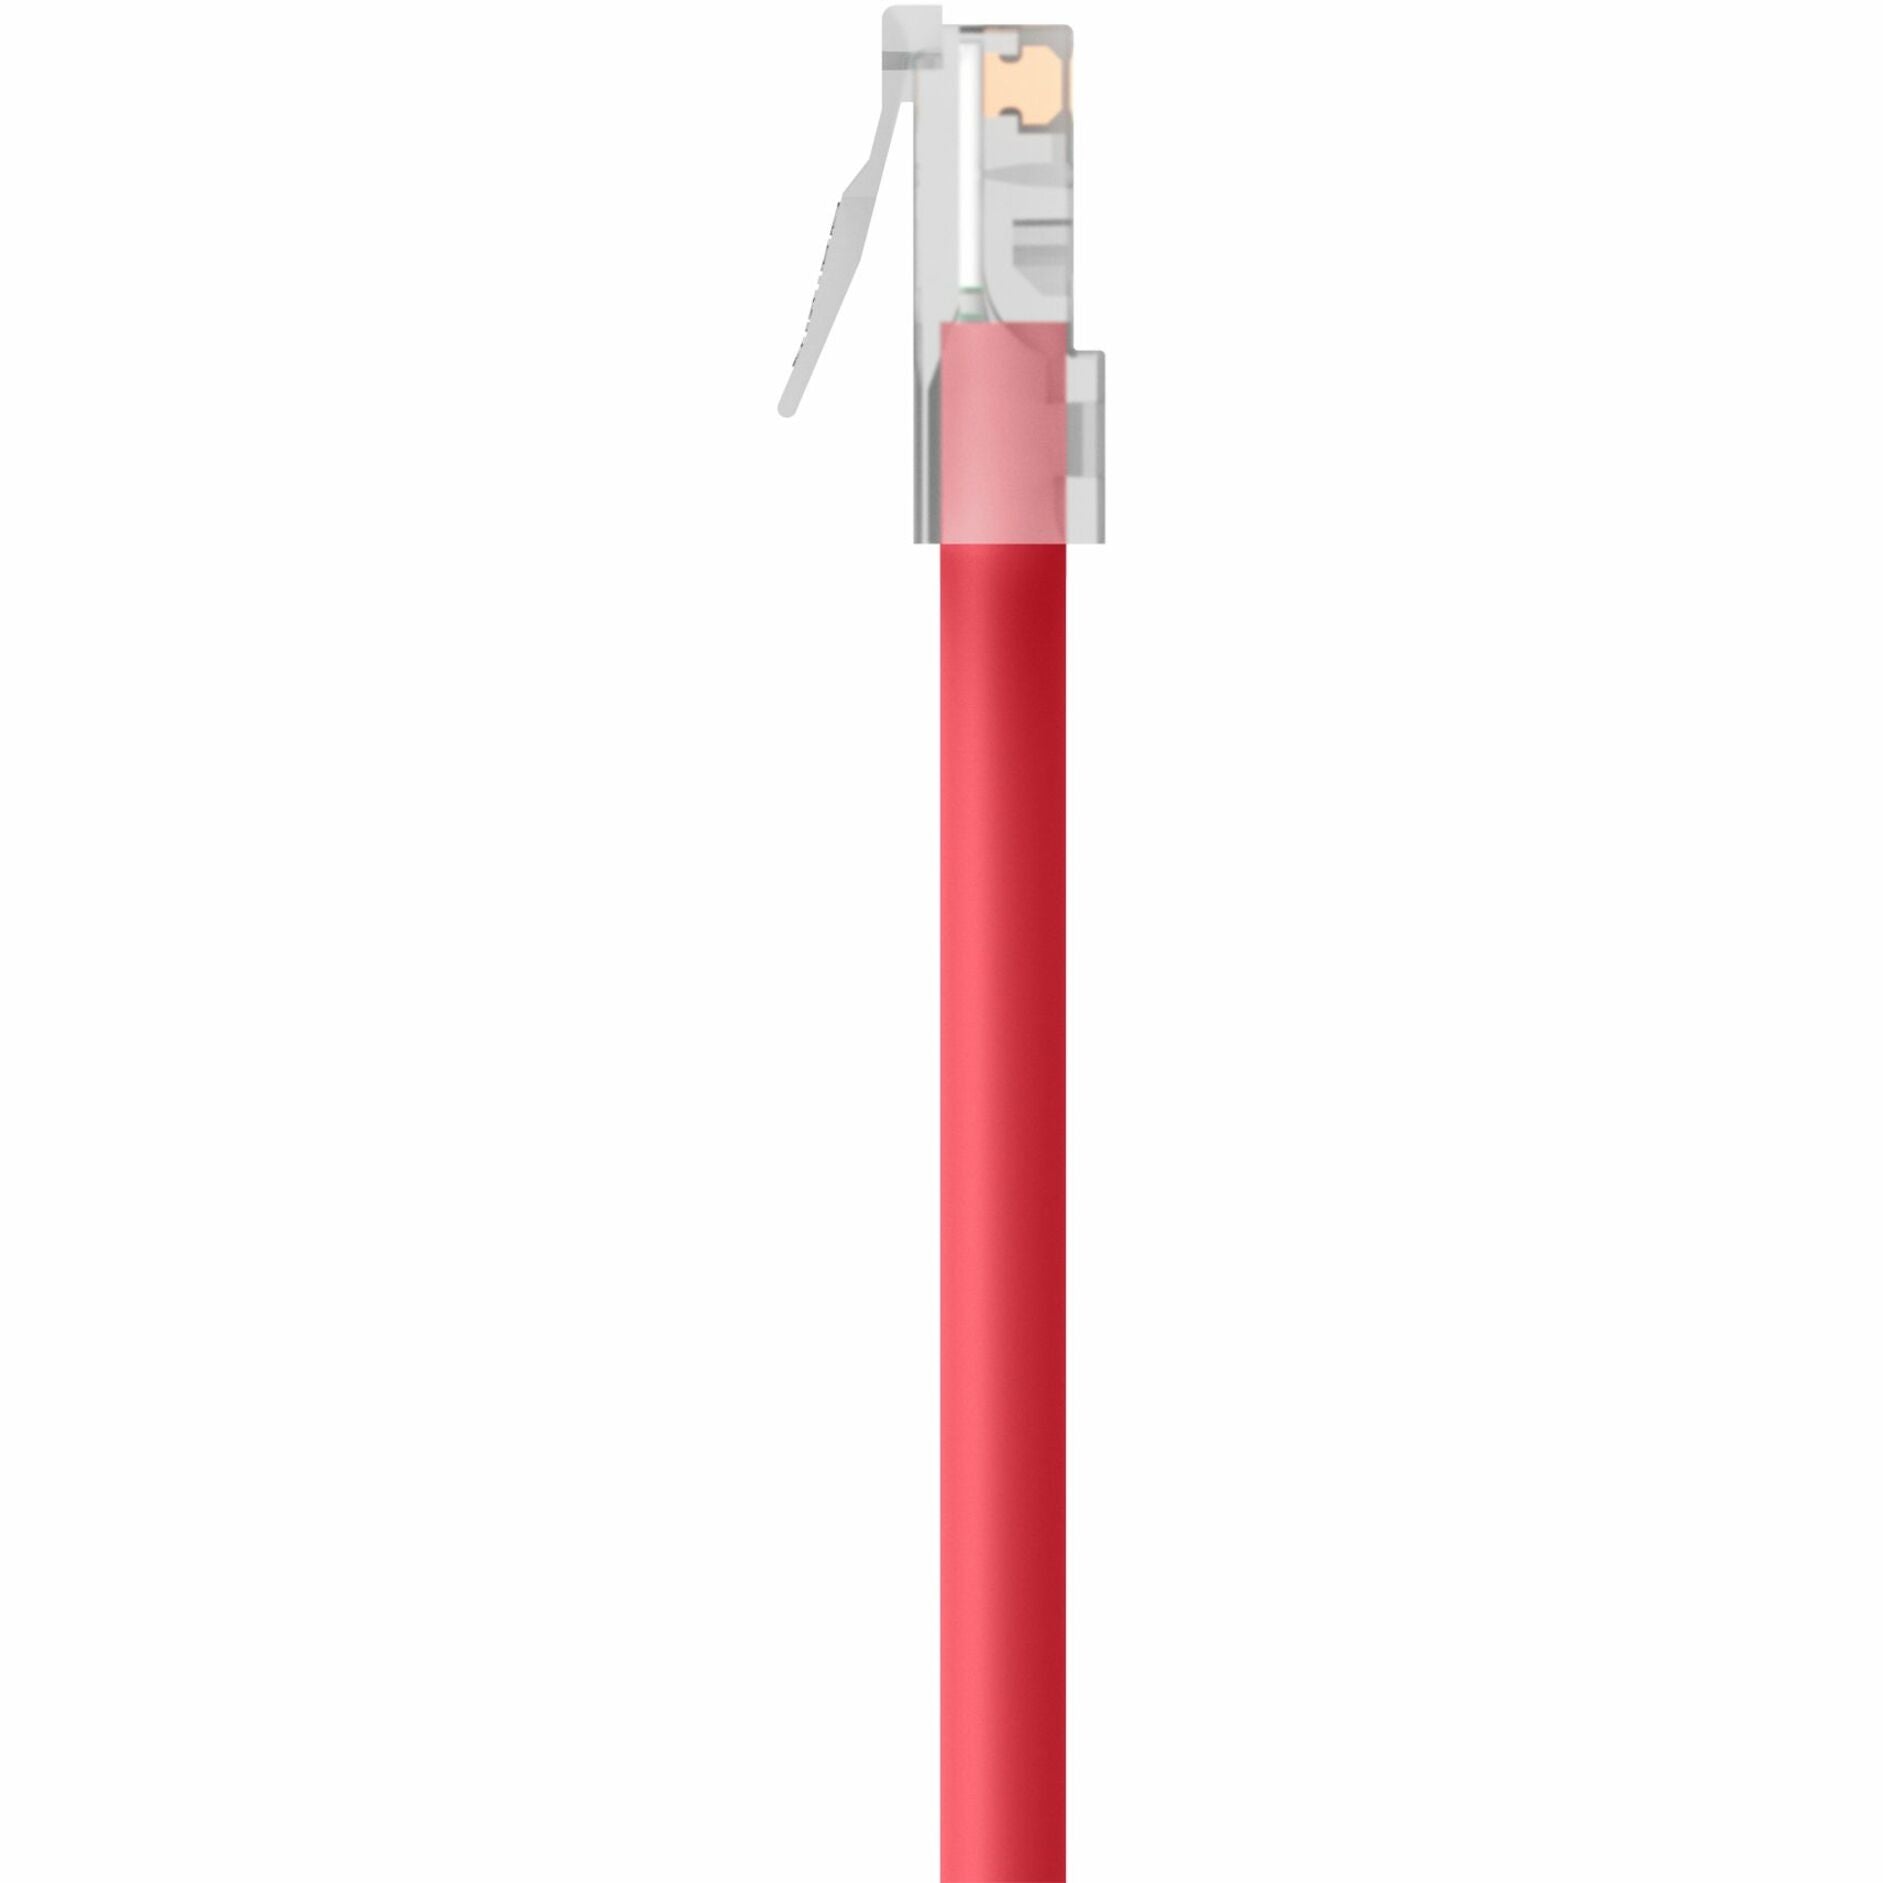 Belkin A3L980-25-RED RJ45 Category 6 Patch Cable, 25 ft, Snagless, Molded, Red